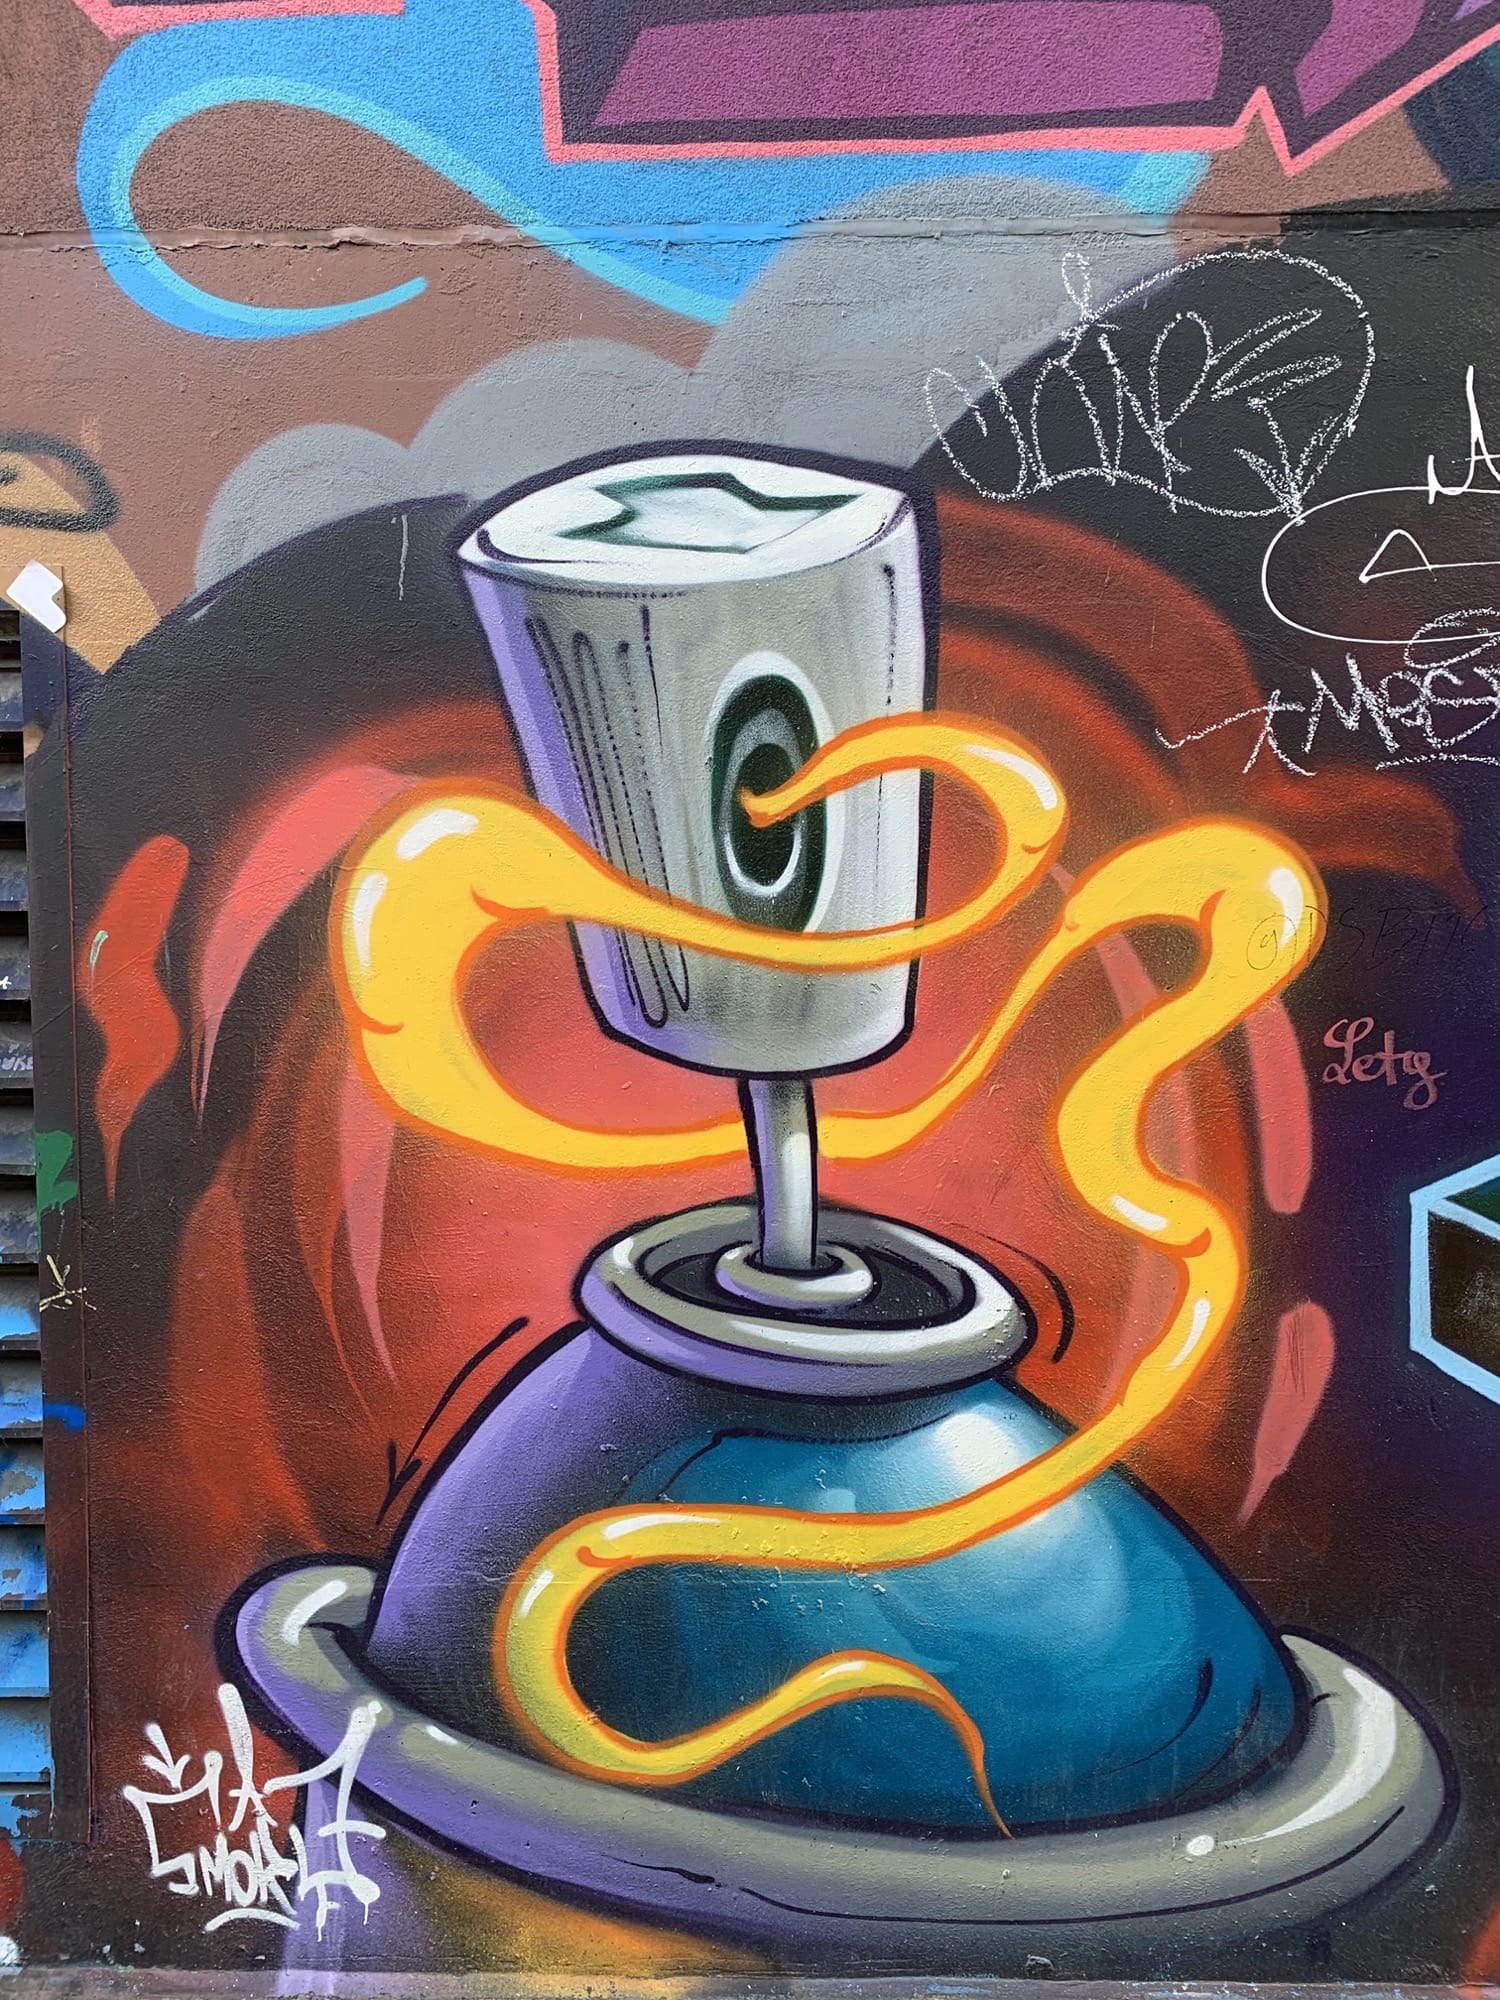 Graffiti 2537  captured by Rabot in Toronto Canada